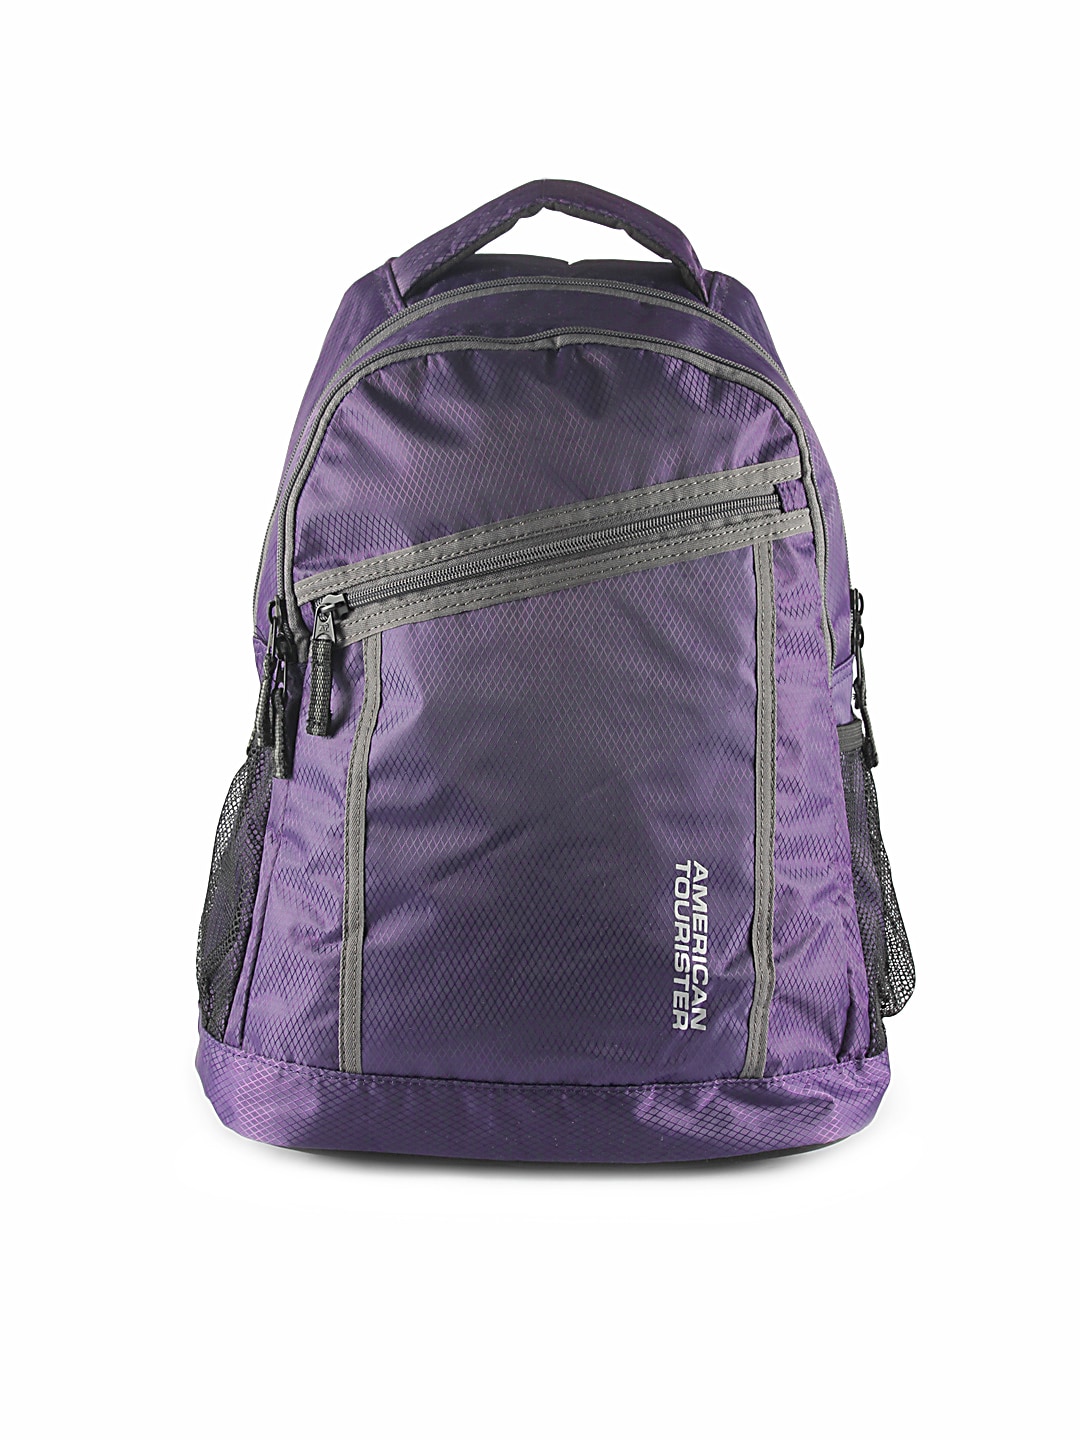 American Tourister Unisex Casual Purple Backpack